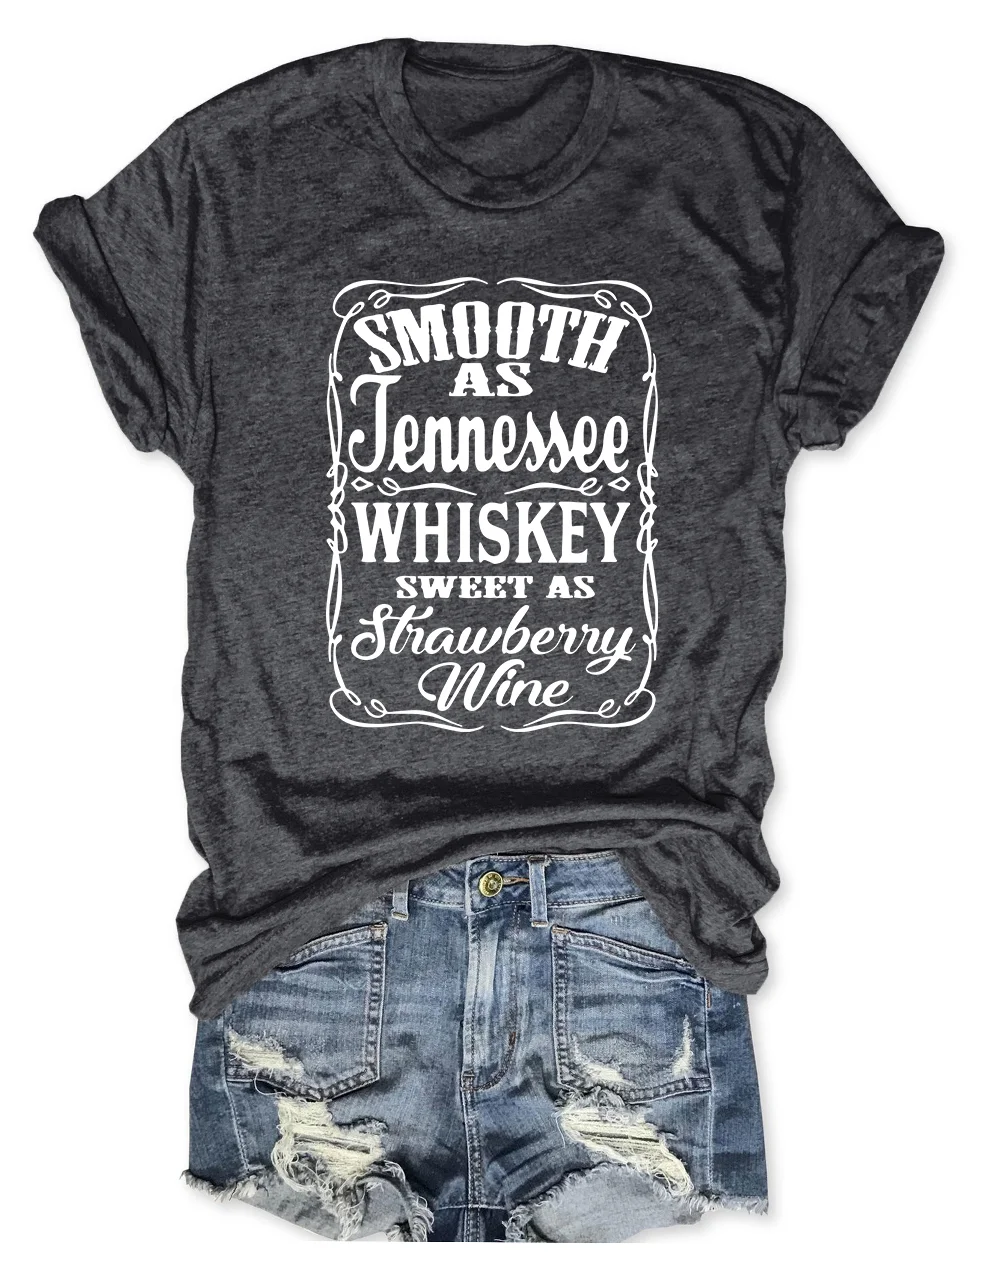 Smooth As Tennessee Whisky Sweet As Strawberry Wine T-Shirt